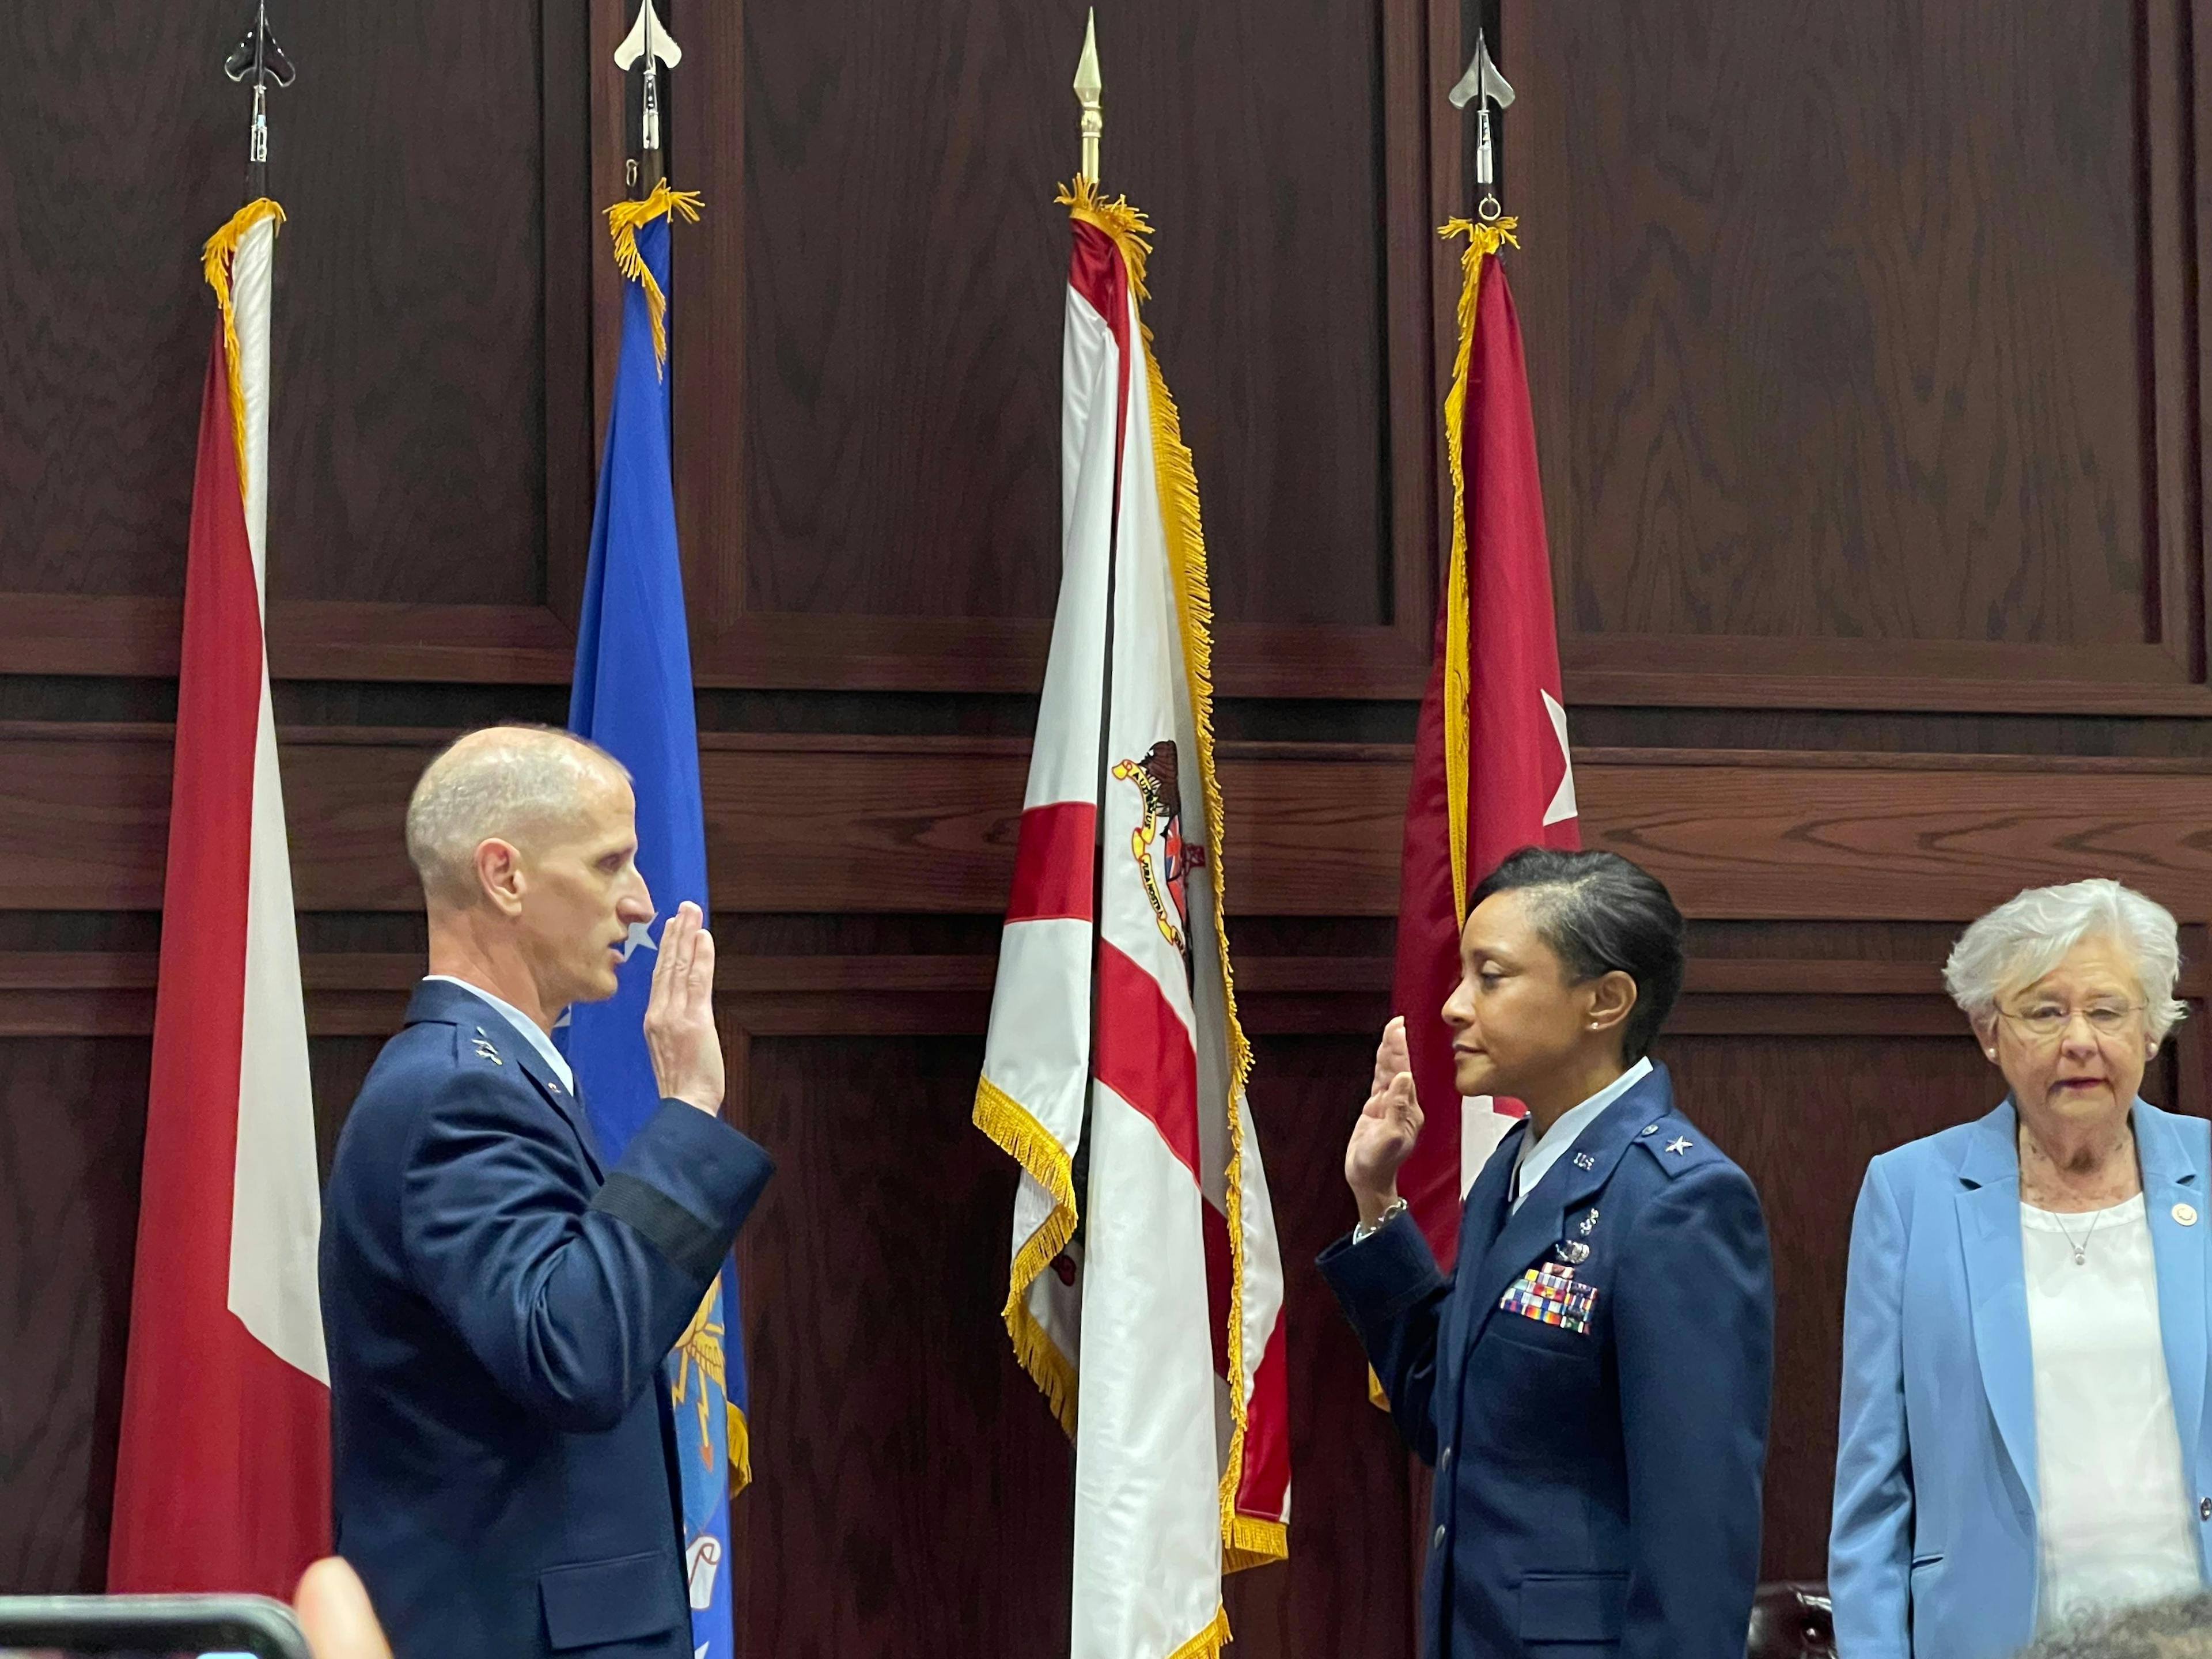 Tara McKennie, RadPartners vice president, is sworn in as brigadier general in the Alabama National Guard. She will serve as Chief of Staff.

Courtesy: RadPartners